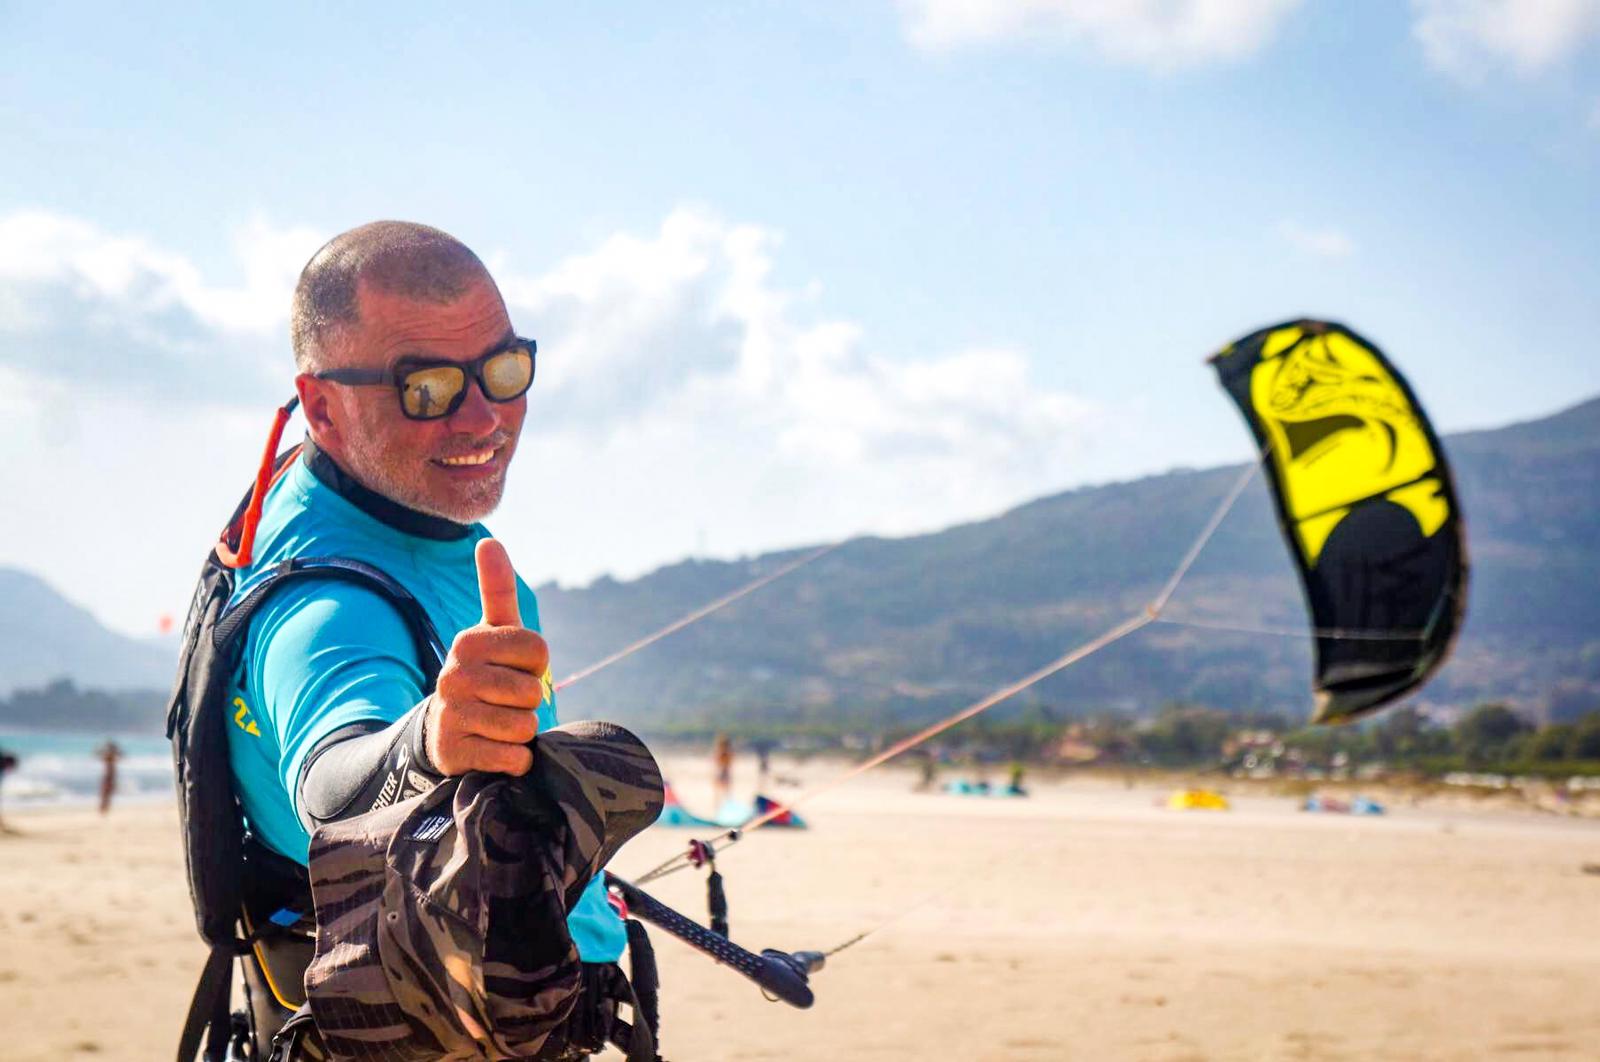 Why dropping prices can destroy the kitesurfing industry in Tarifa